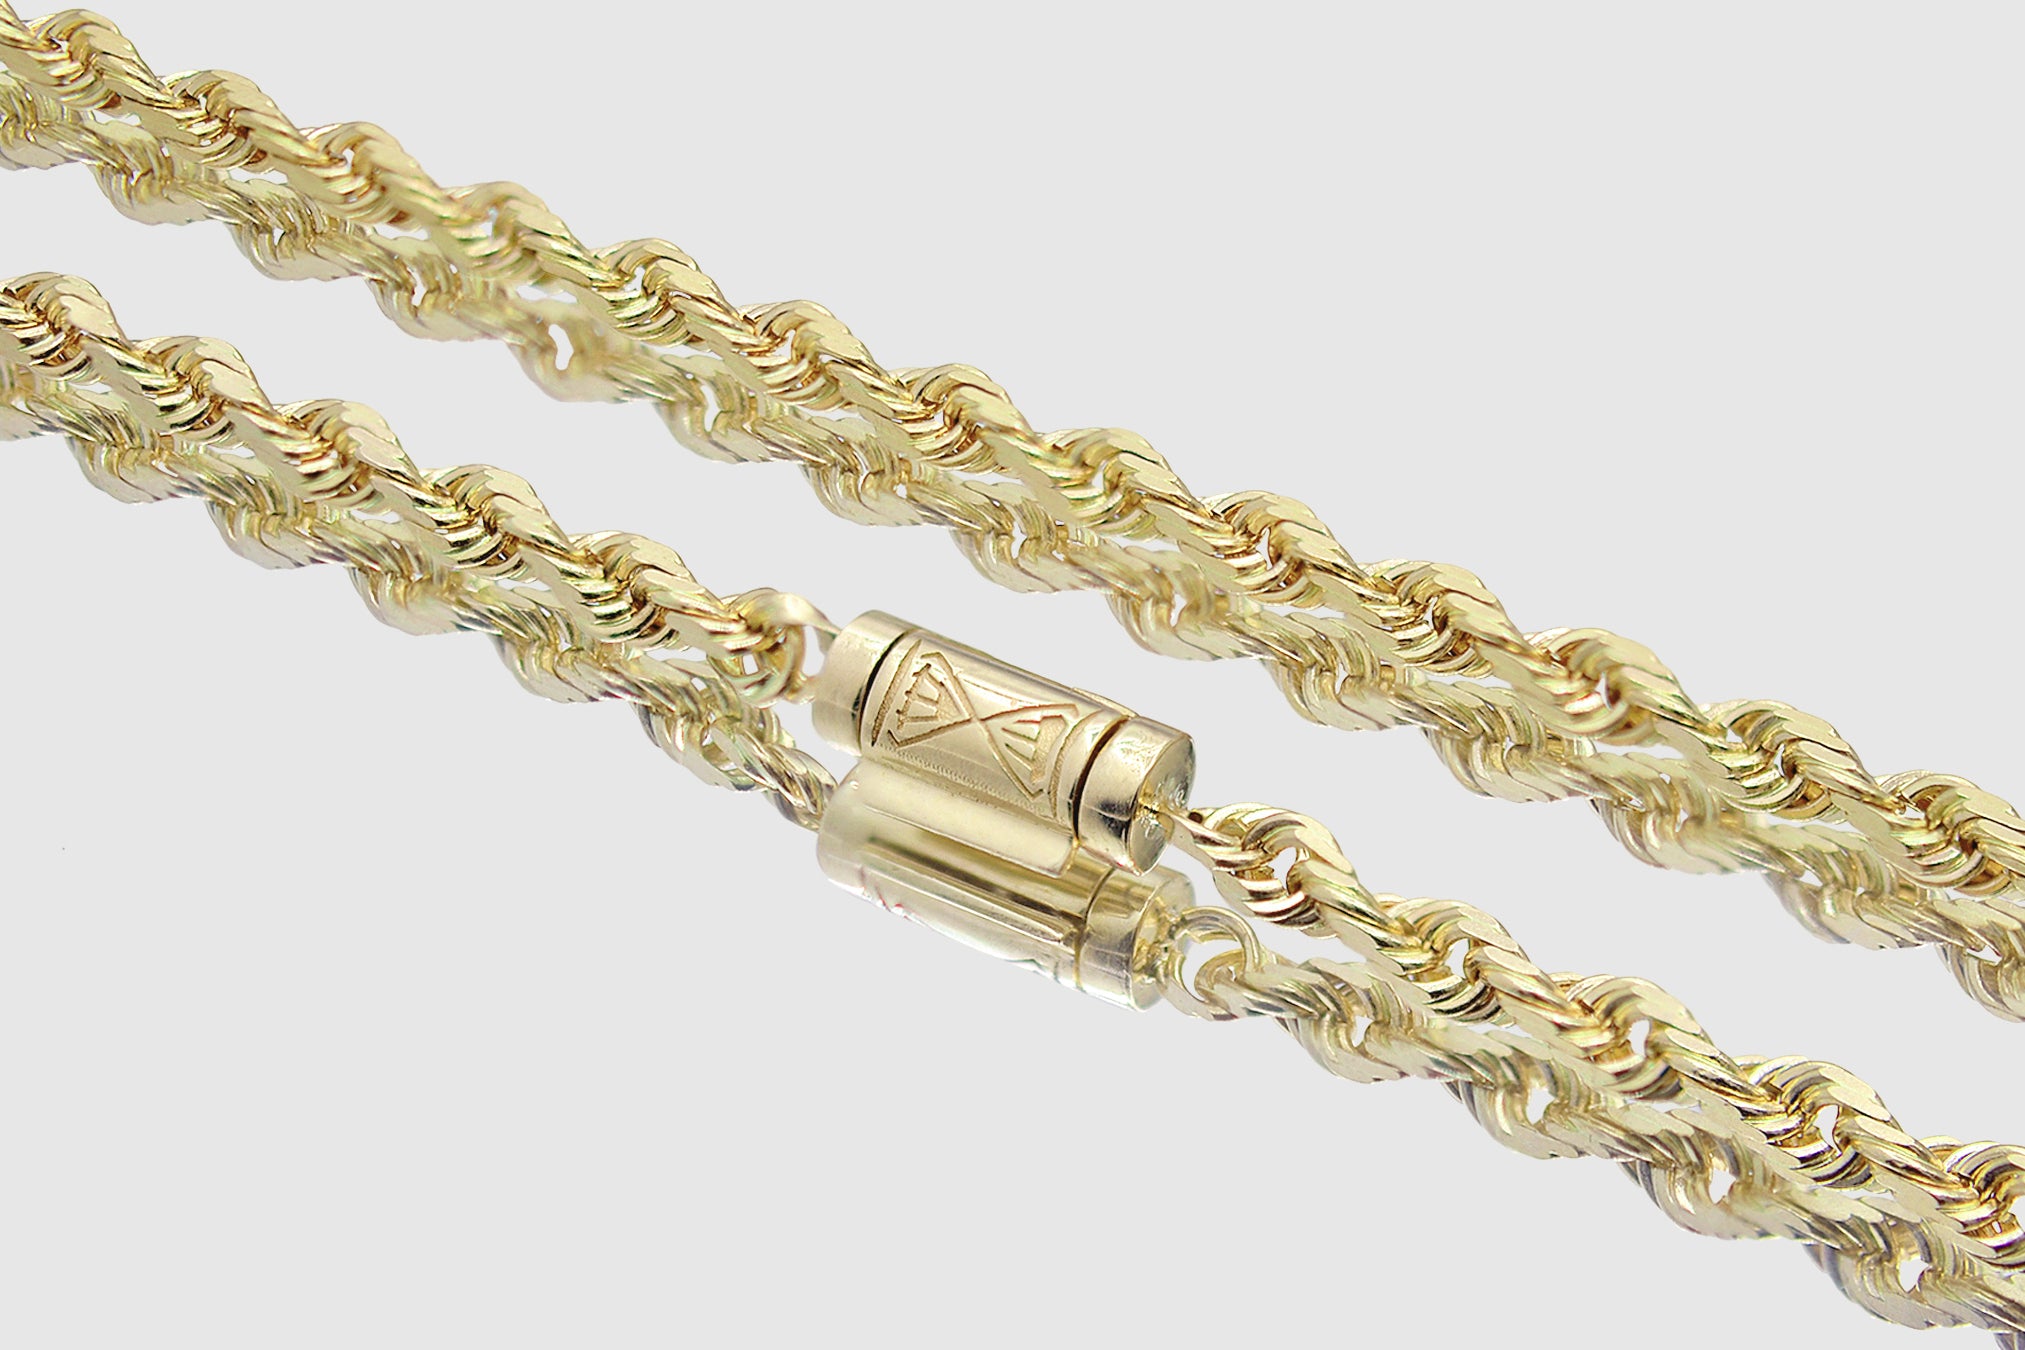 gold necklace lock